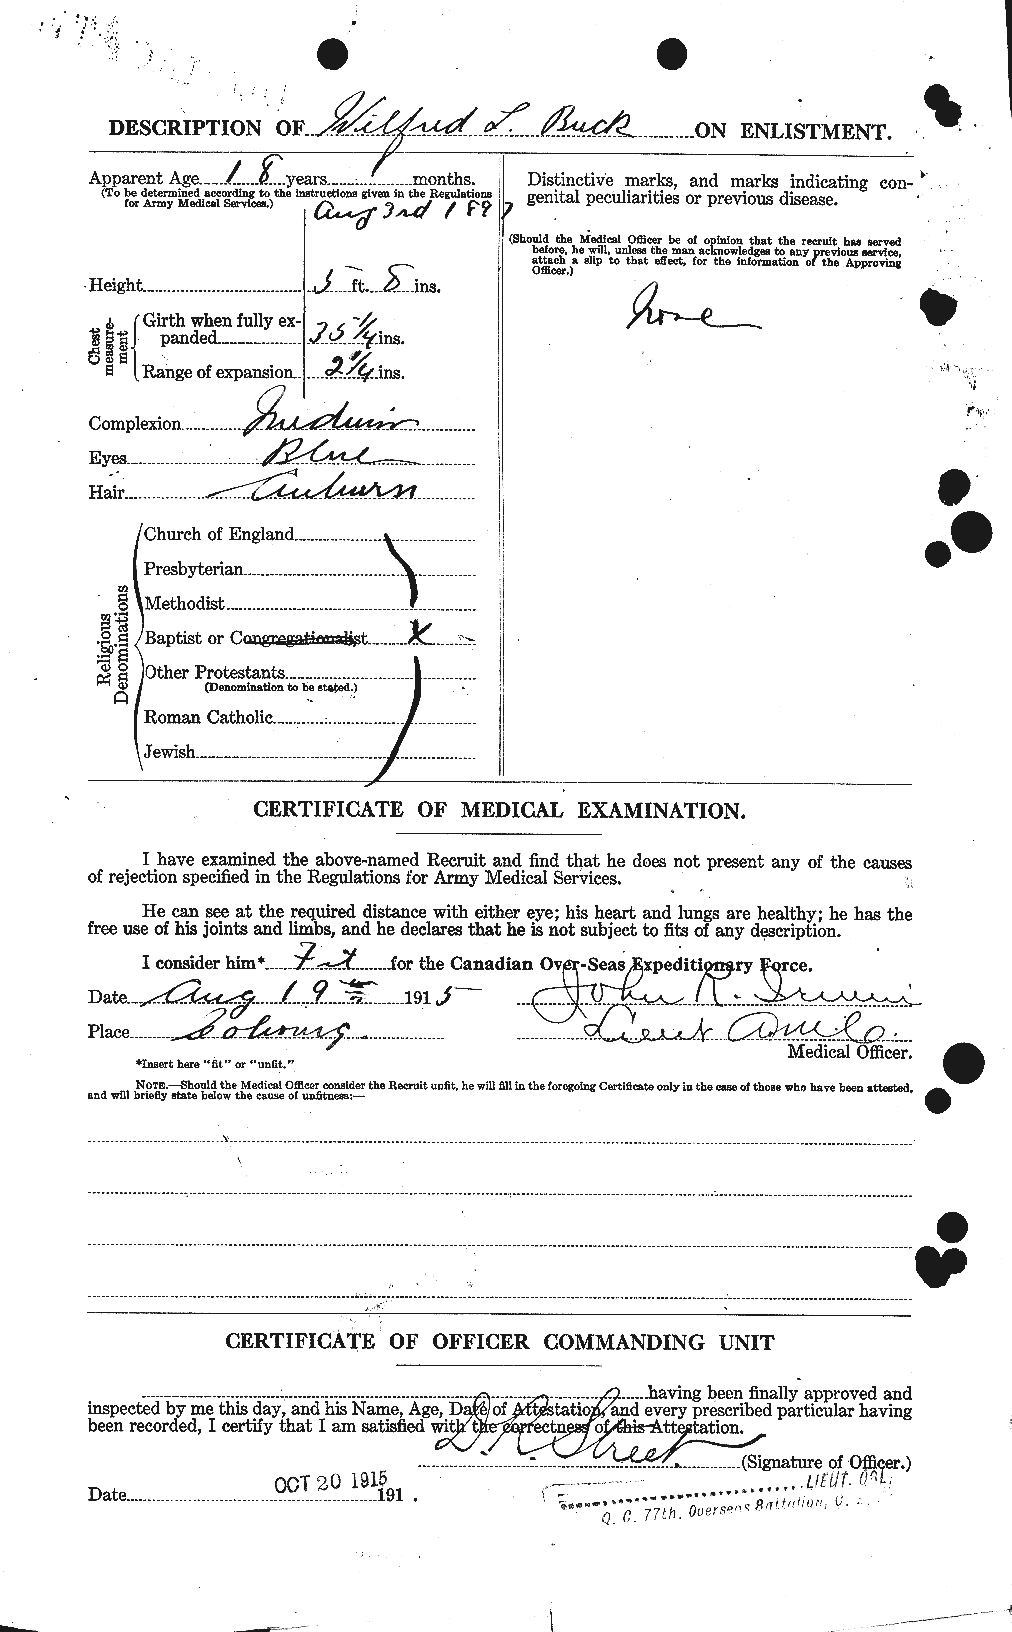 Personnel Records of the First World War - CEF 269359b